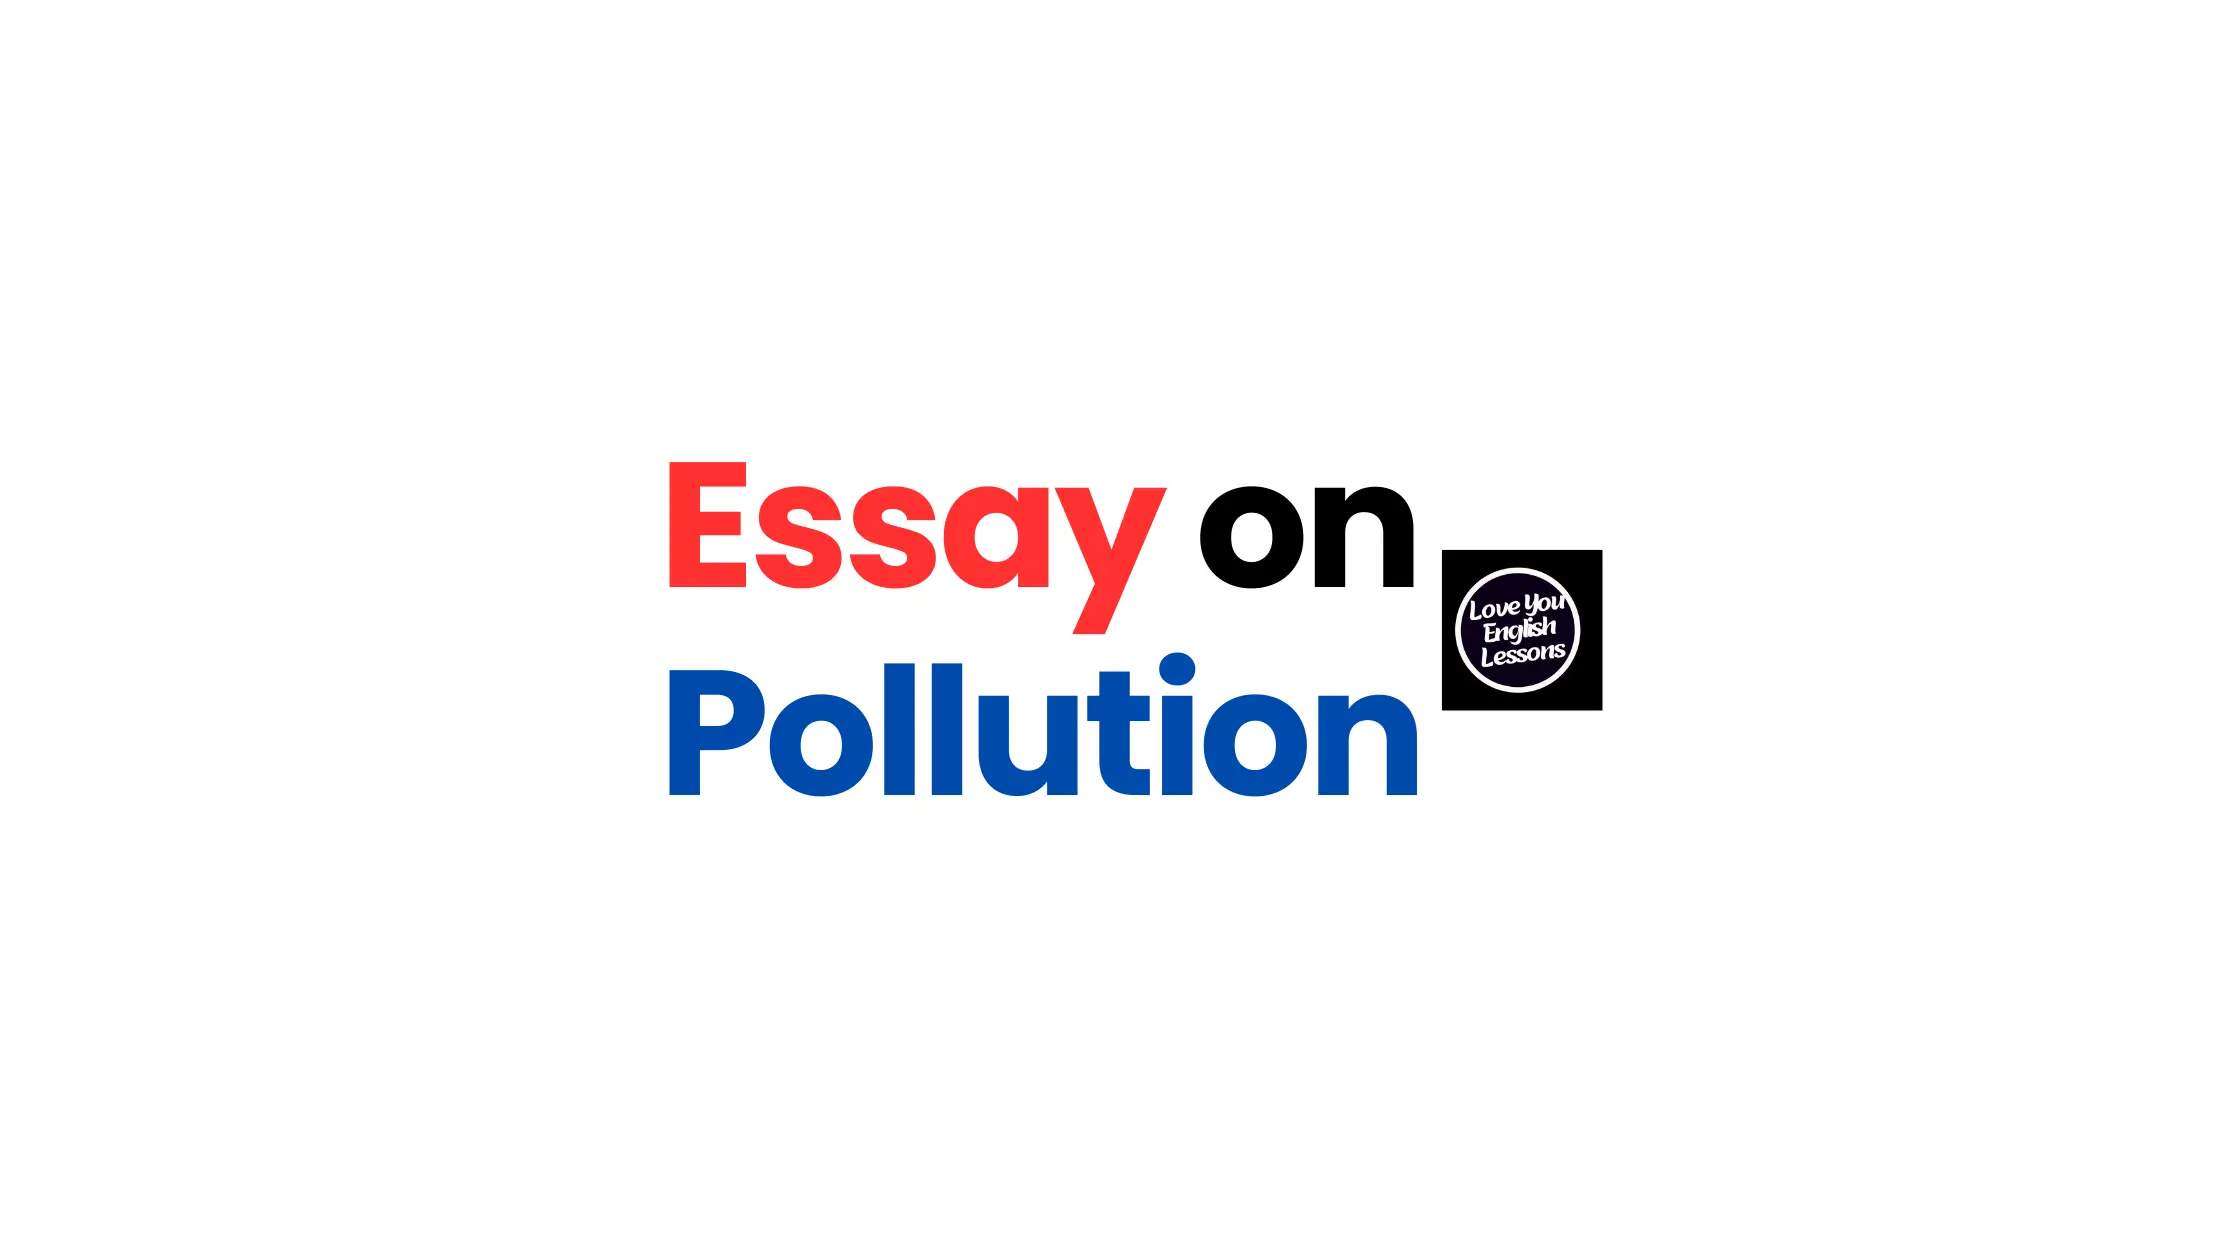 Essay on pollution in English